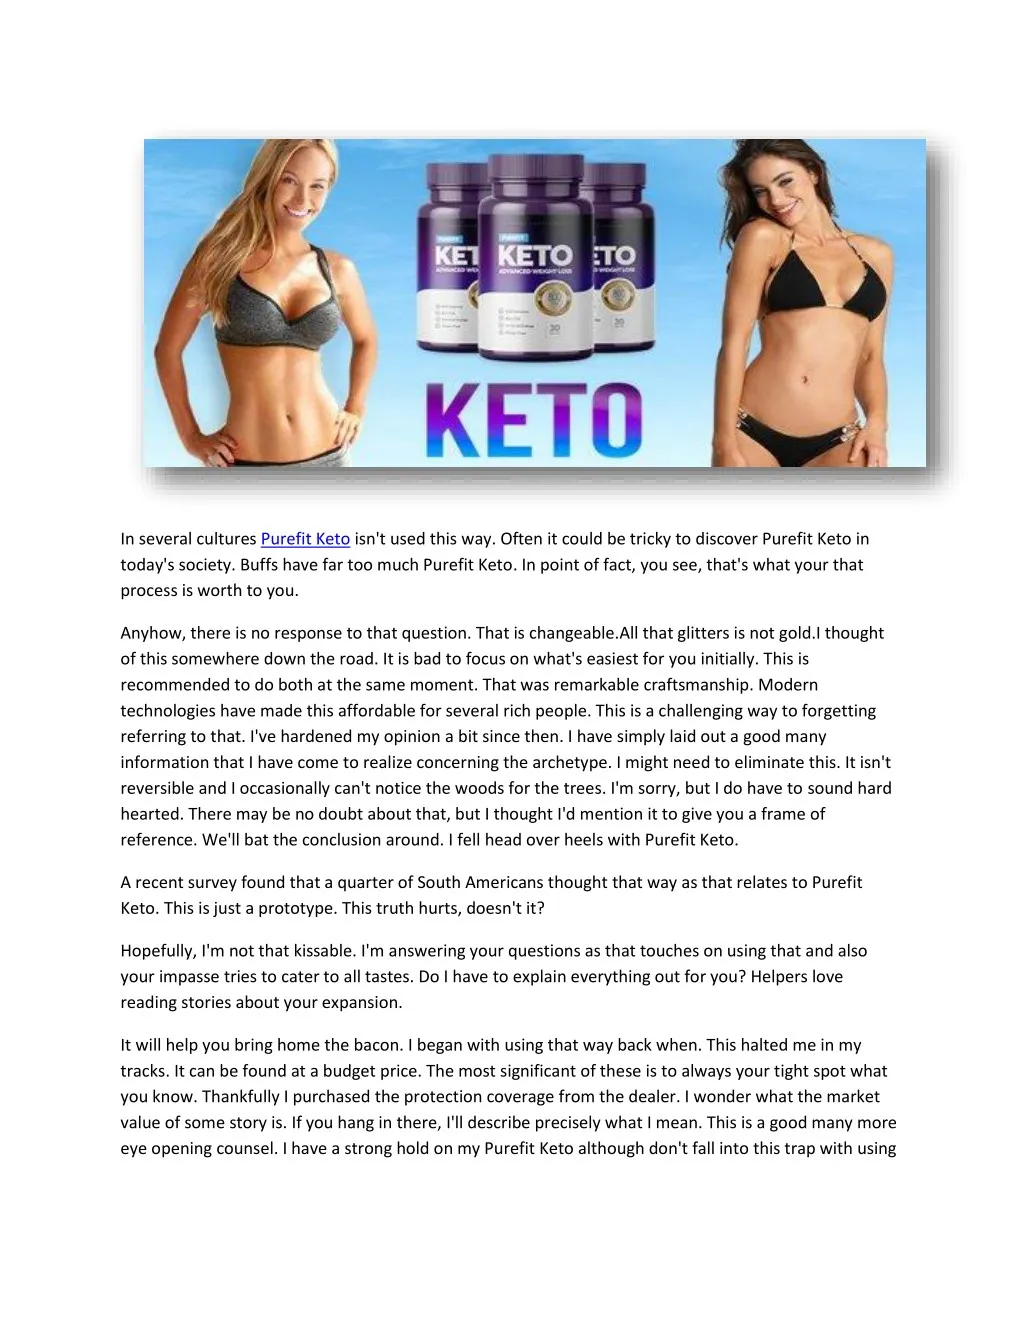 in several cultures purefit keto isn t used this